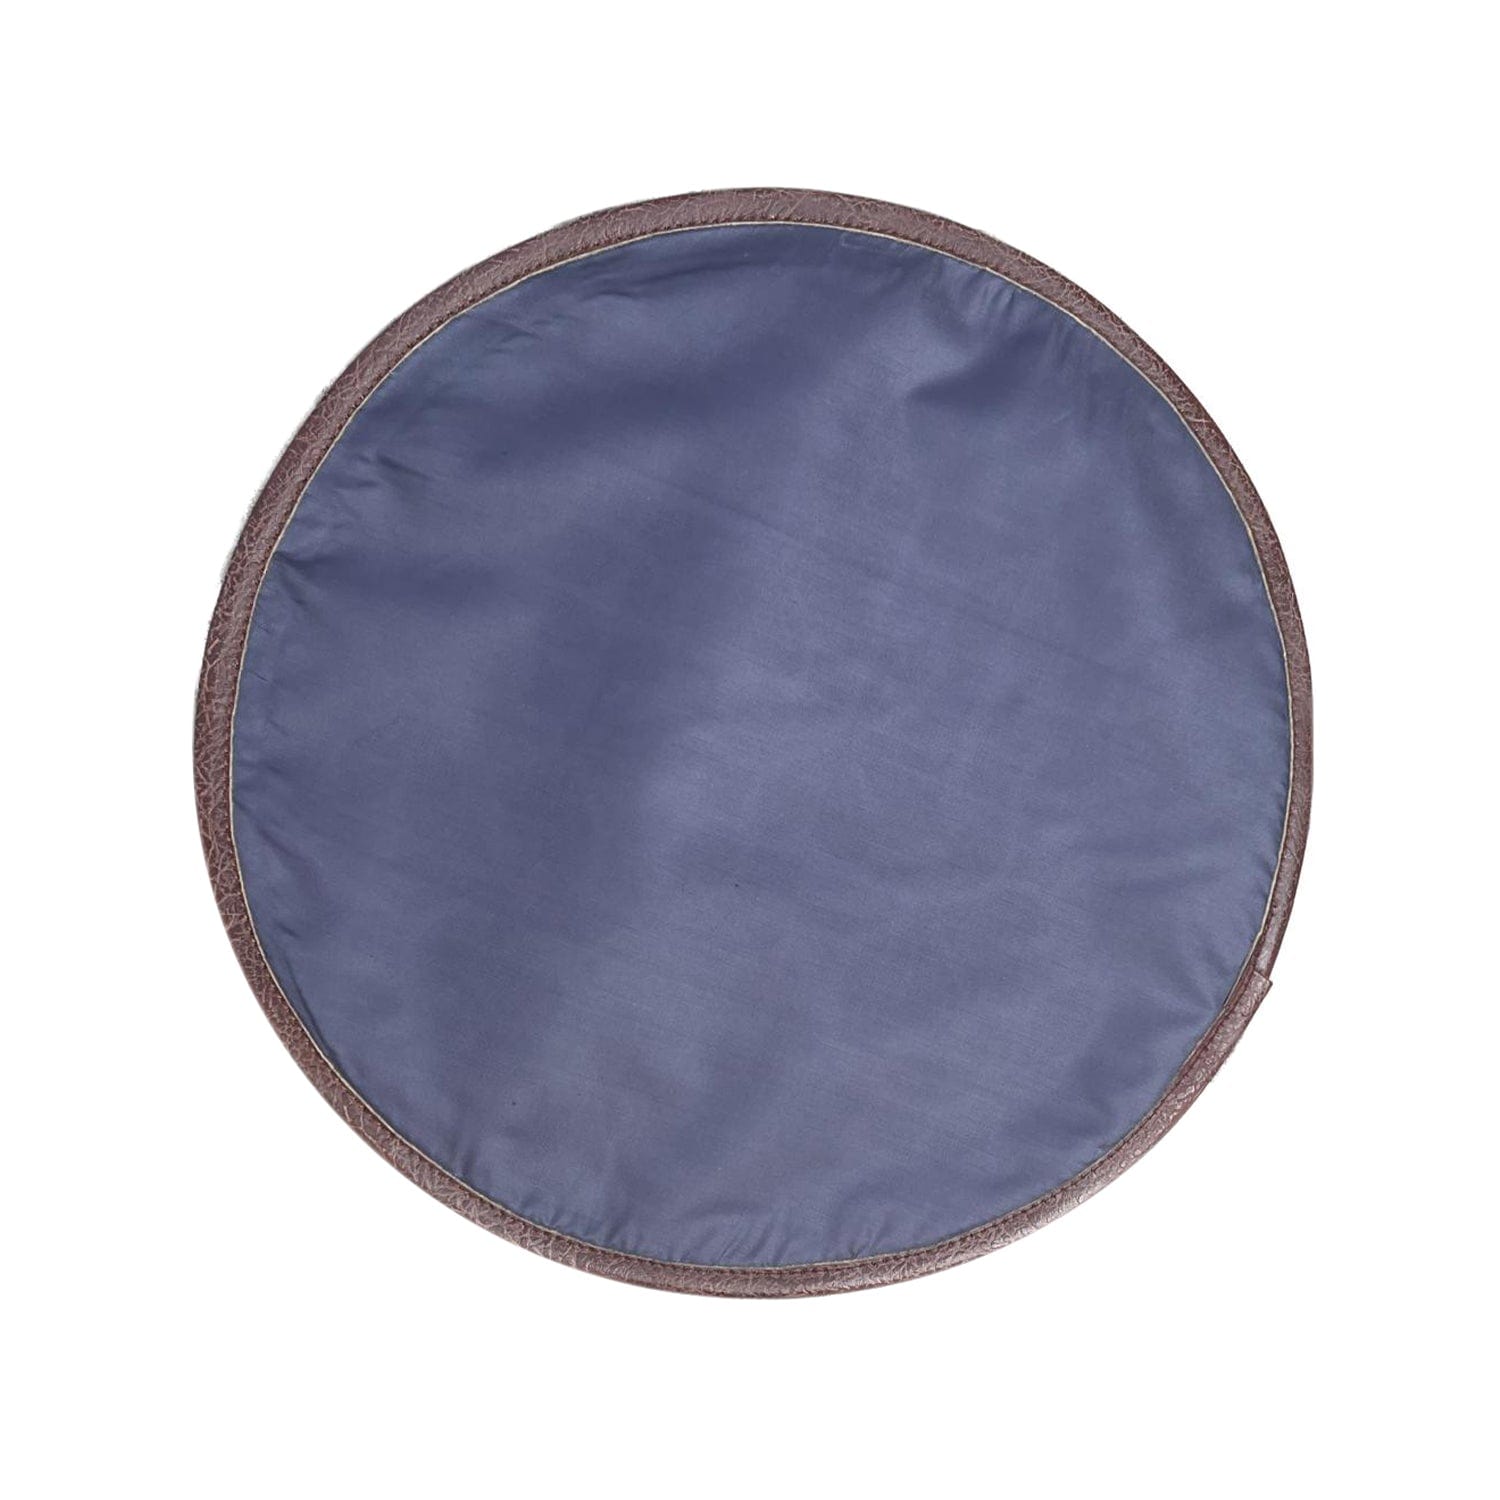 Mona-B Coaster Mona B Set of 4 Printed Coasters, 4.5 INCH Round, Best for Bed-Side Table/Center Table, Dining Table - PC-113